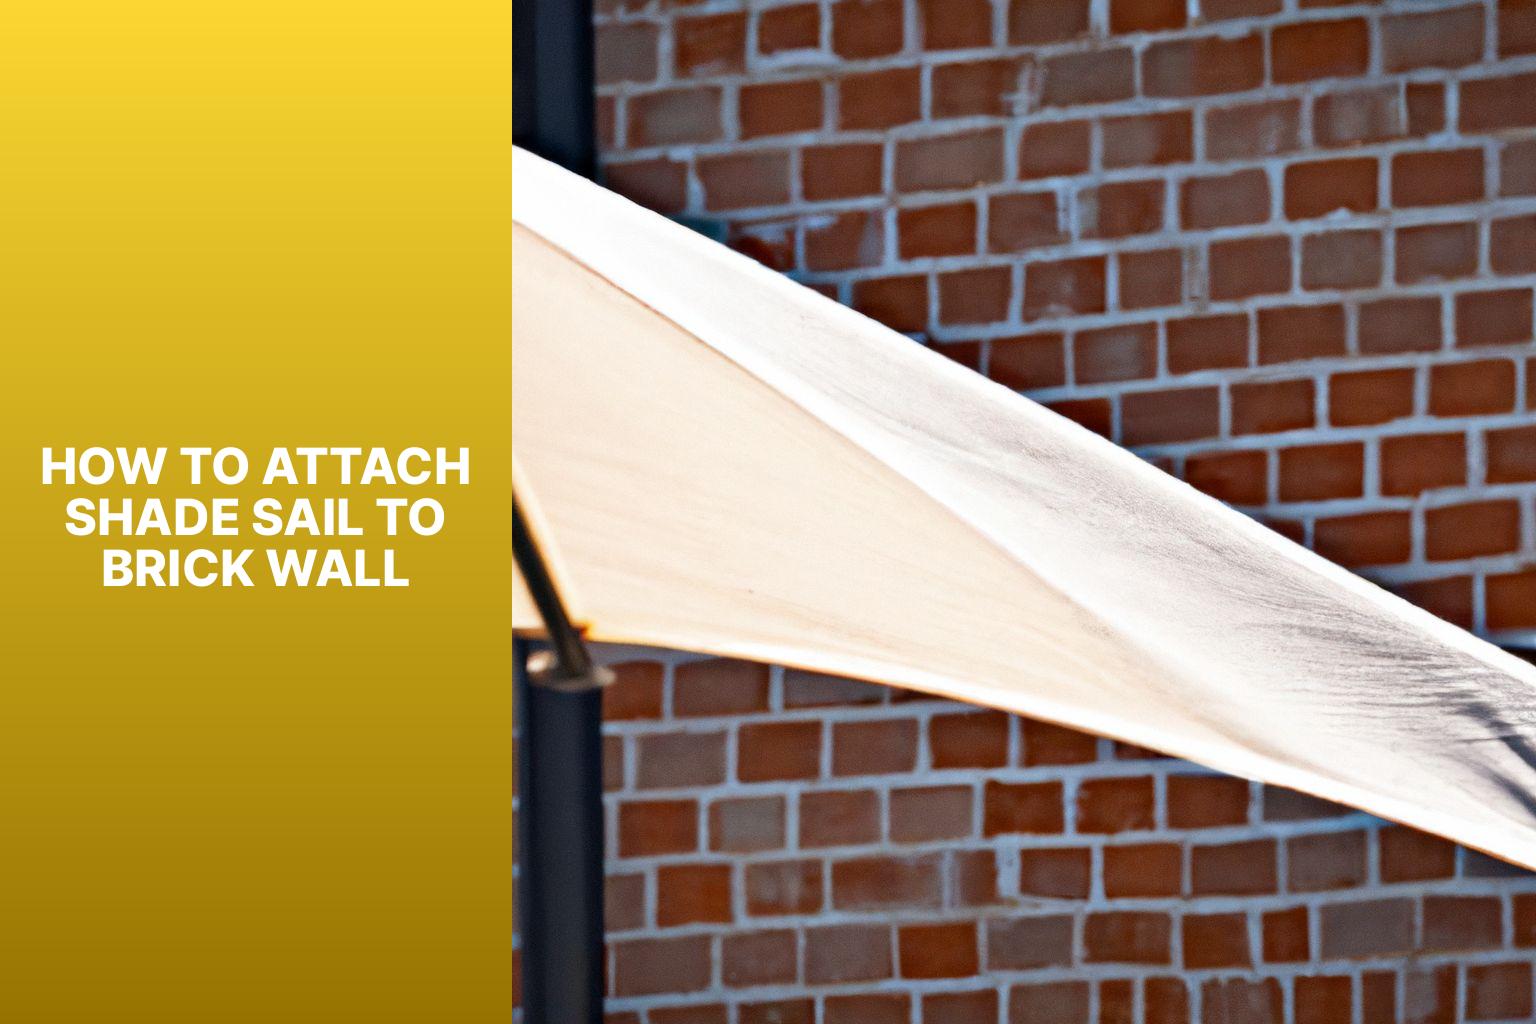 A Step-by-Step Guide: How To Attach Shade Sail To Brick Wall